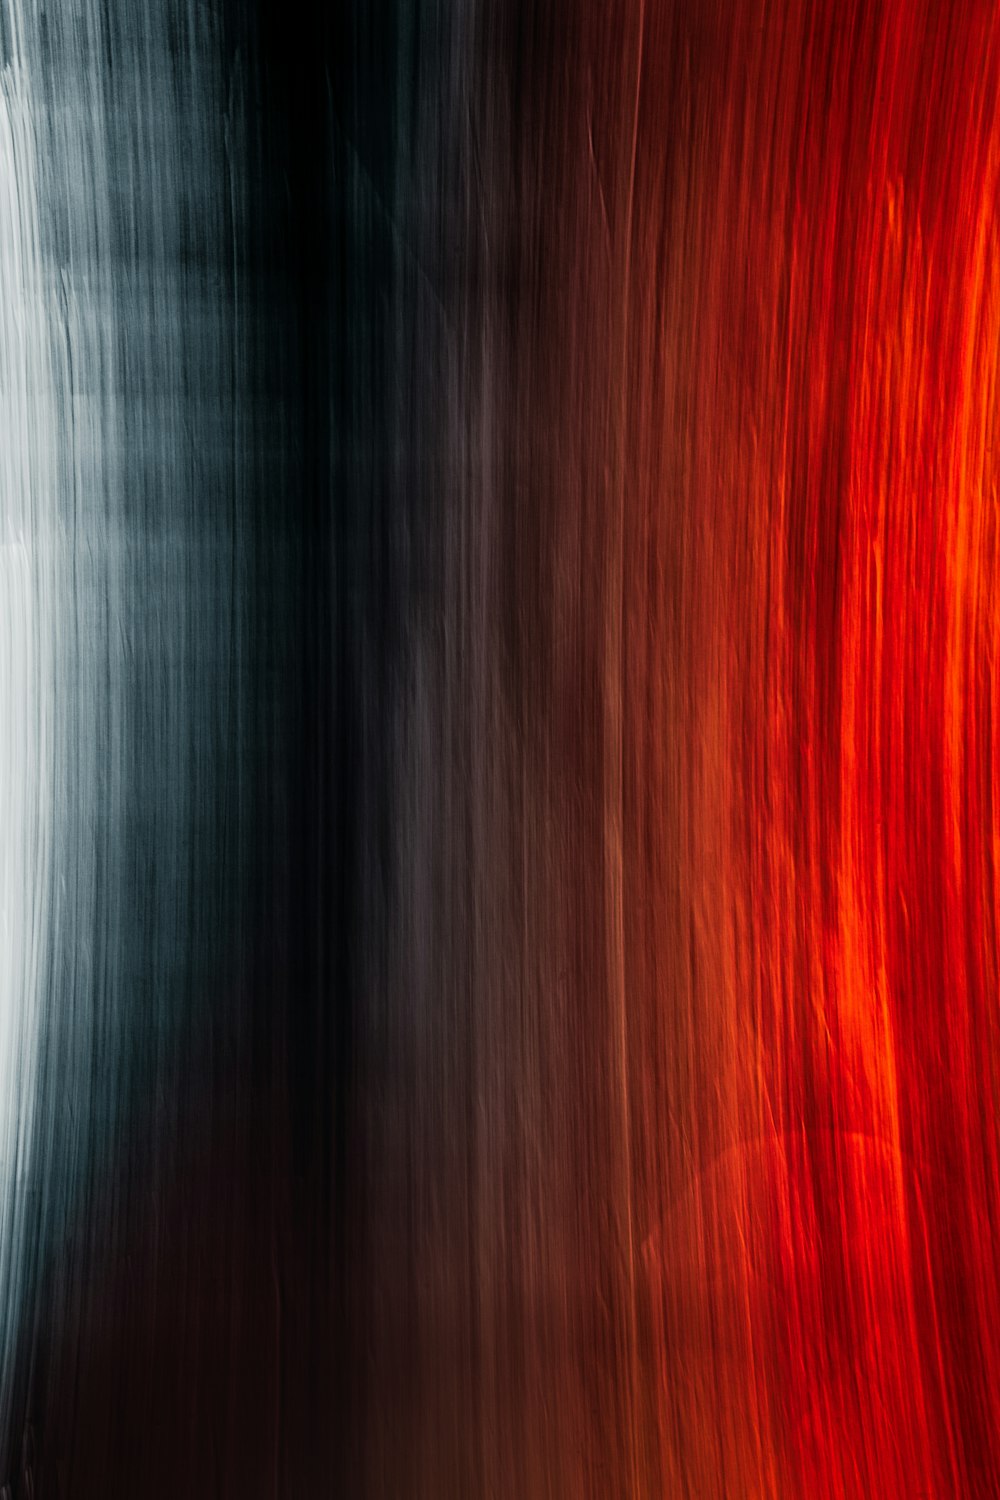 Red and black abstract painting photo – Free Texture Image on Unsplash